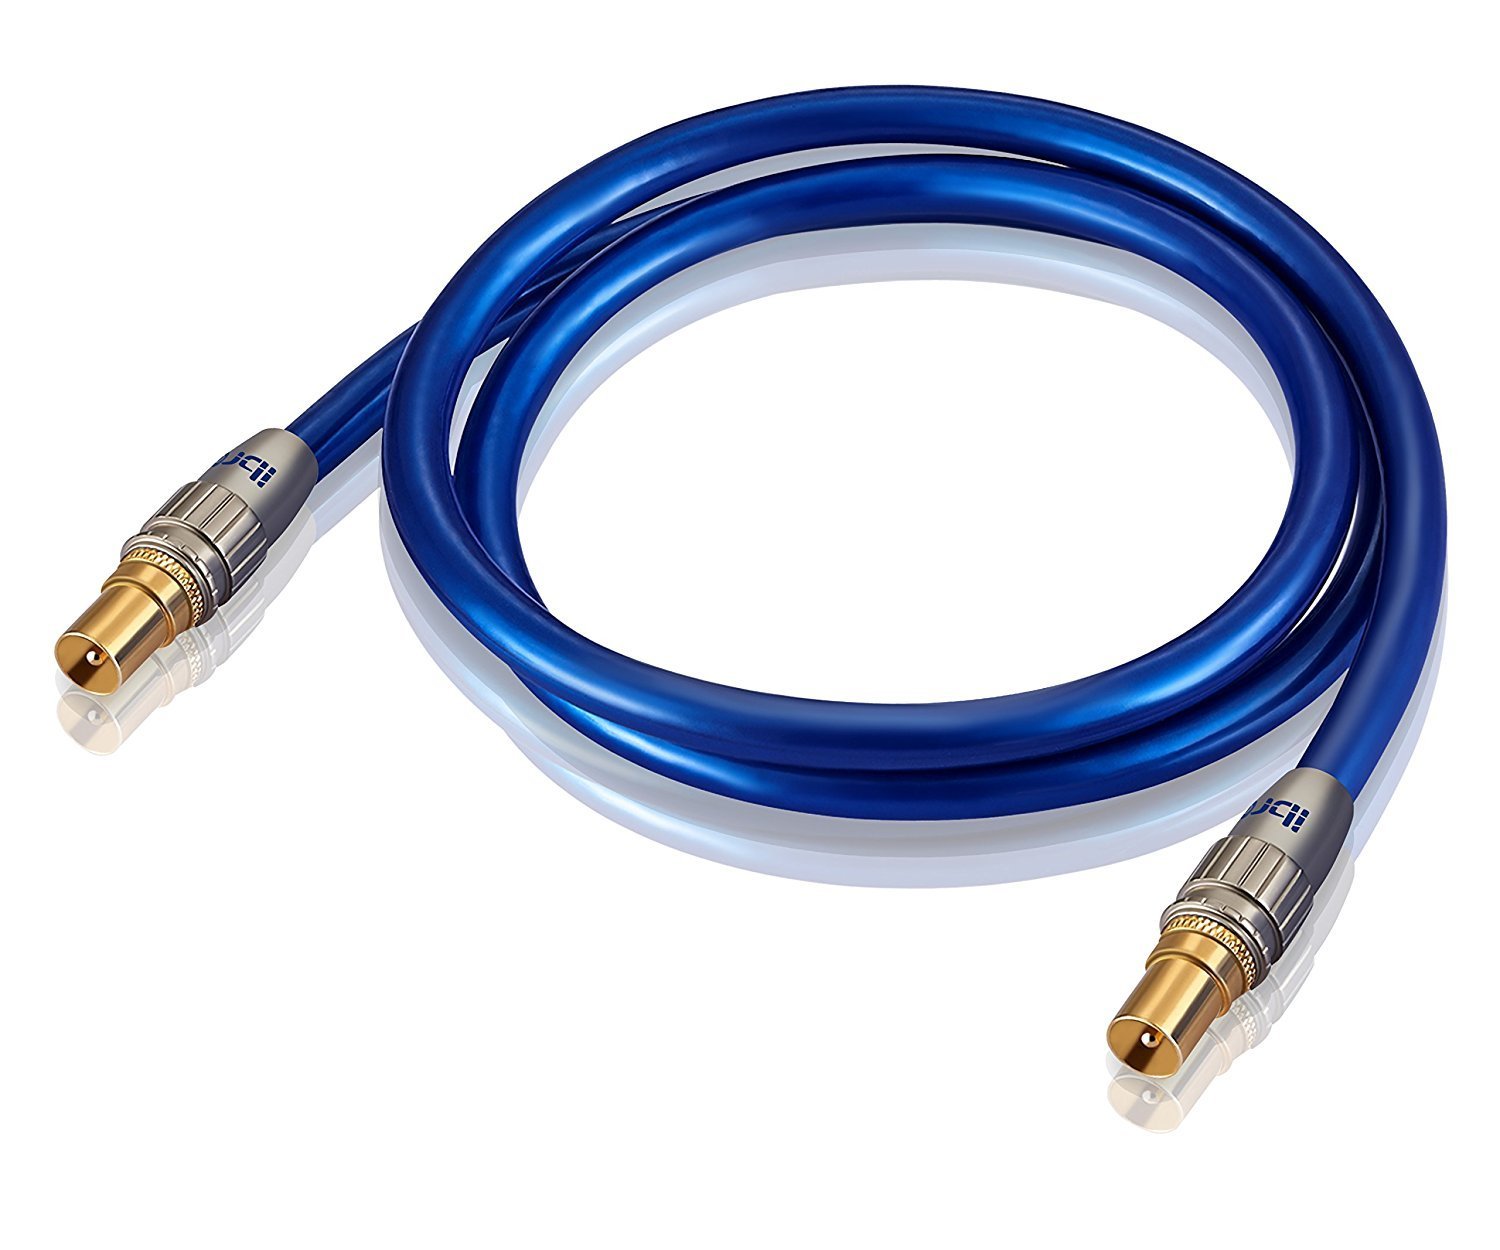 10M HDTV Antenna Cable | TV Aerial Cable | Premium Freeview Coaxial Cable | Connectors: Coax Male to Coax Male | For UHF / RF TVs, VCRs, DVD players, DVRs, cable boxes and satellite | IBRA Blue Gold